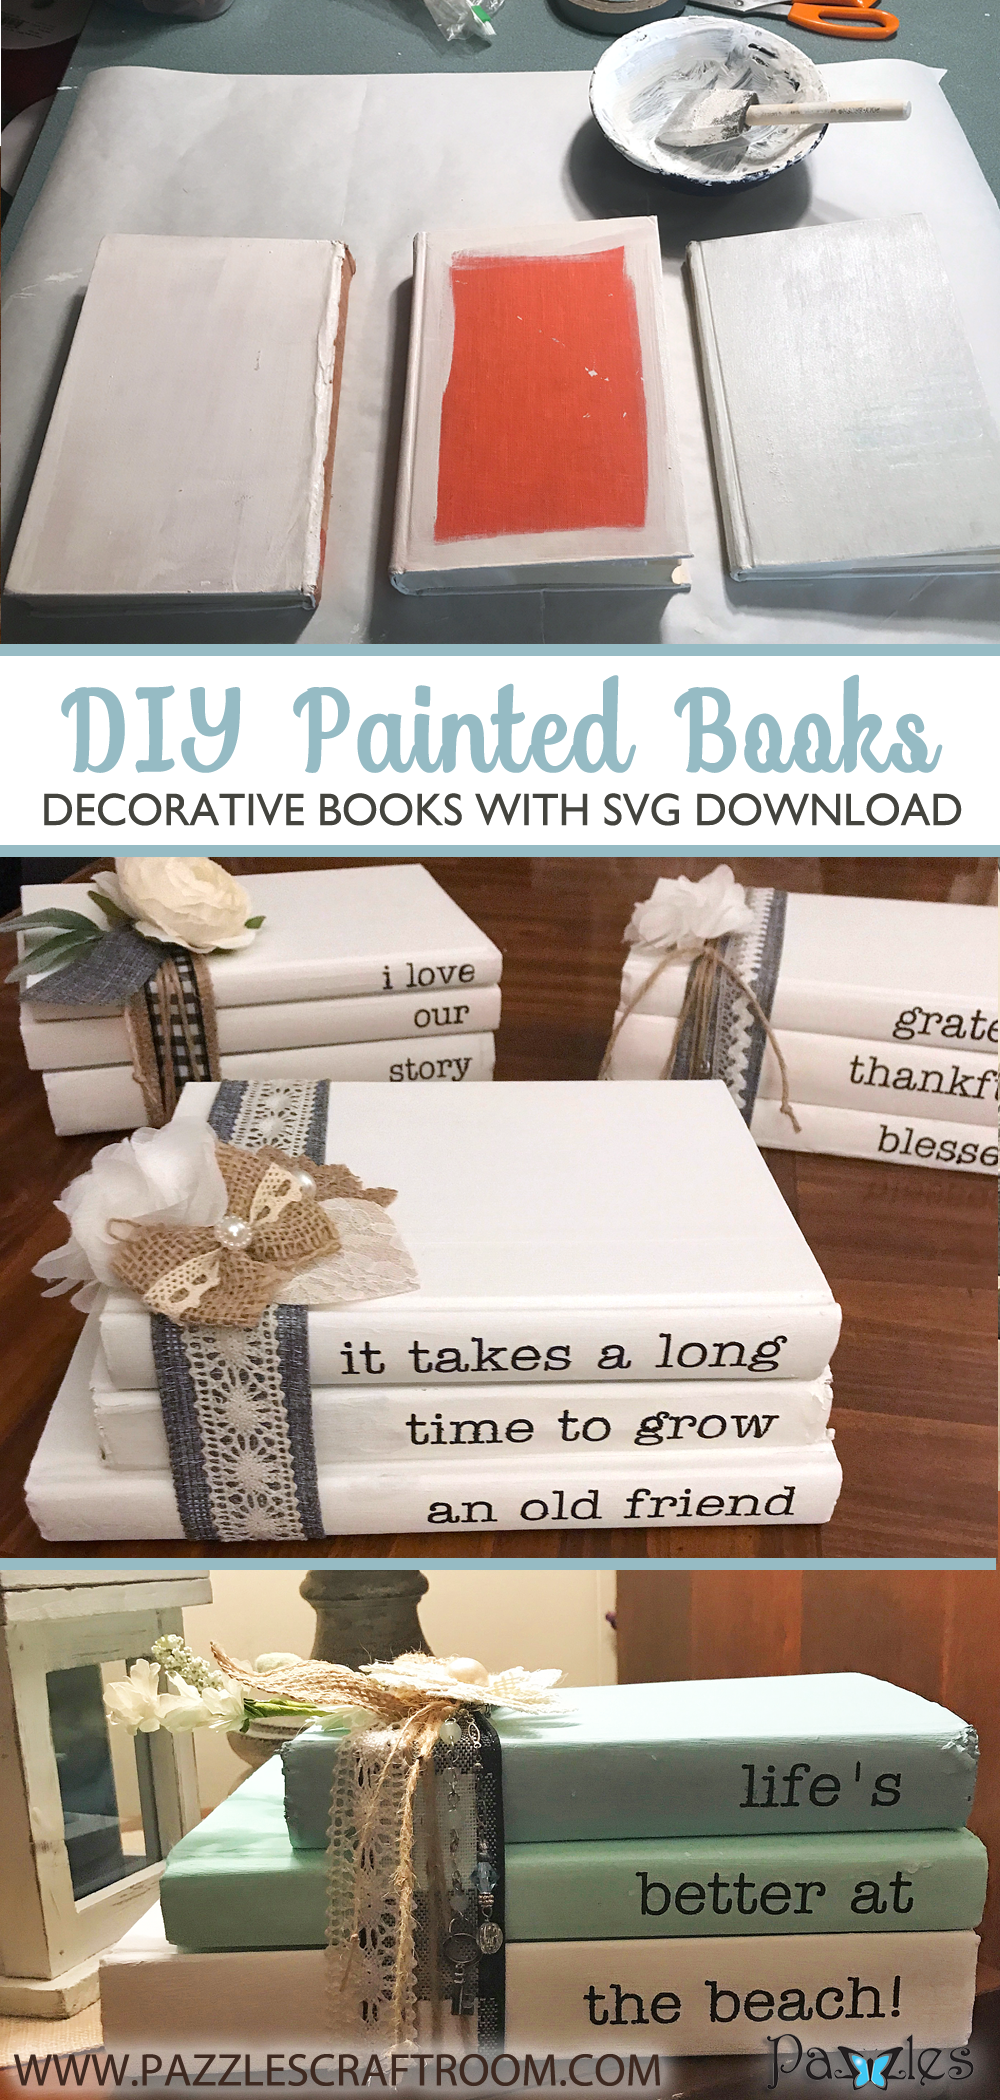 Pazzles DIY Chalk Painted Books with instant SVG download. Compatible with all major electronic cutters including Pazzles Inspiration, Cricut, and Silhouette Cameo. Design by Leslie Peppers.